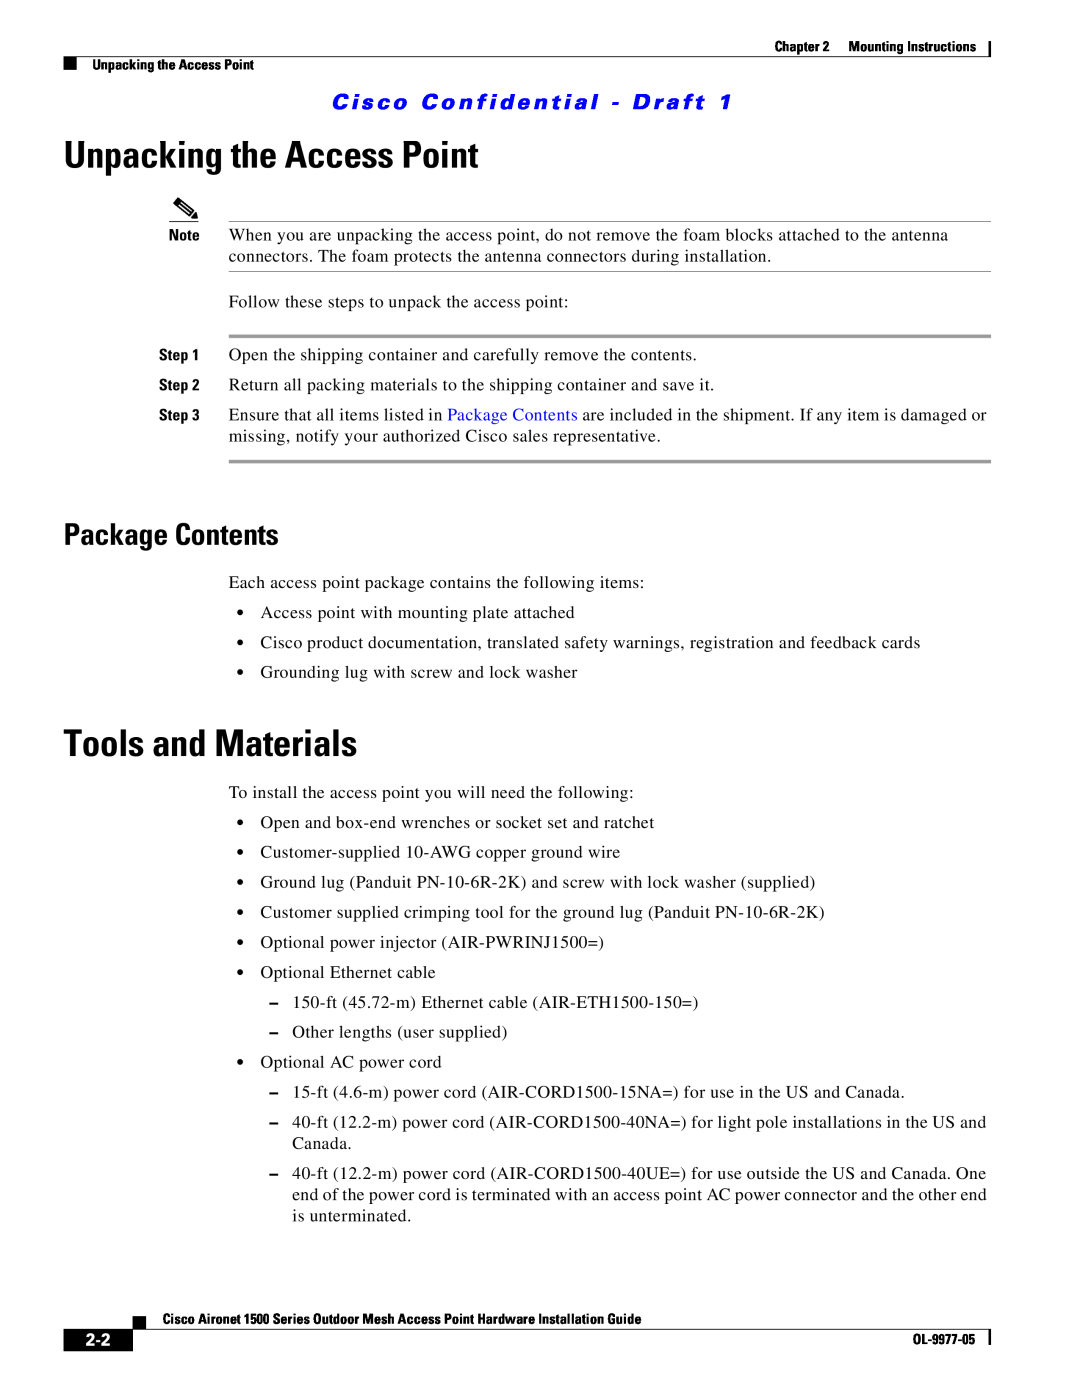 Cisco Systems 1500 Series manual Unpacking the Access Point, Tools and Materials, Package Contents 